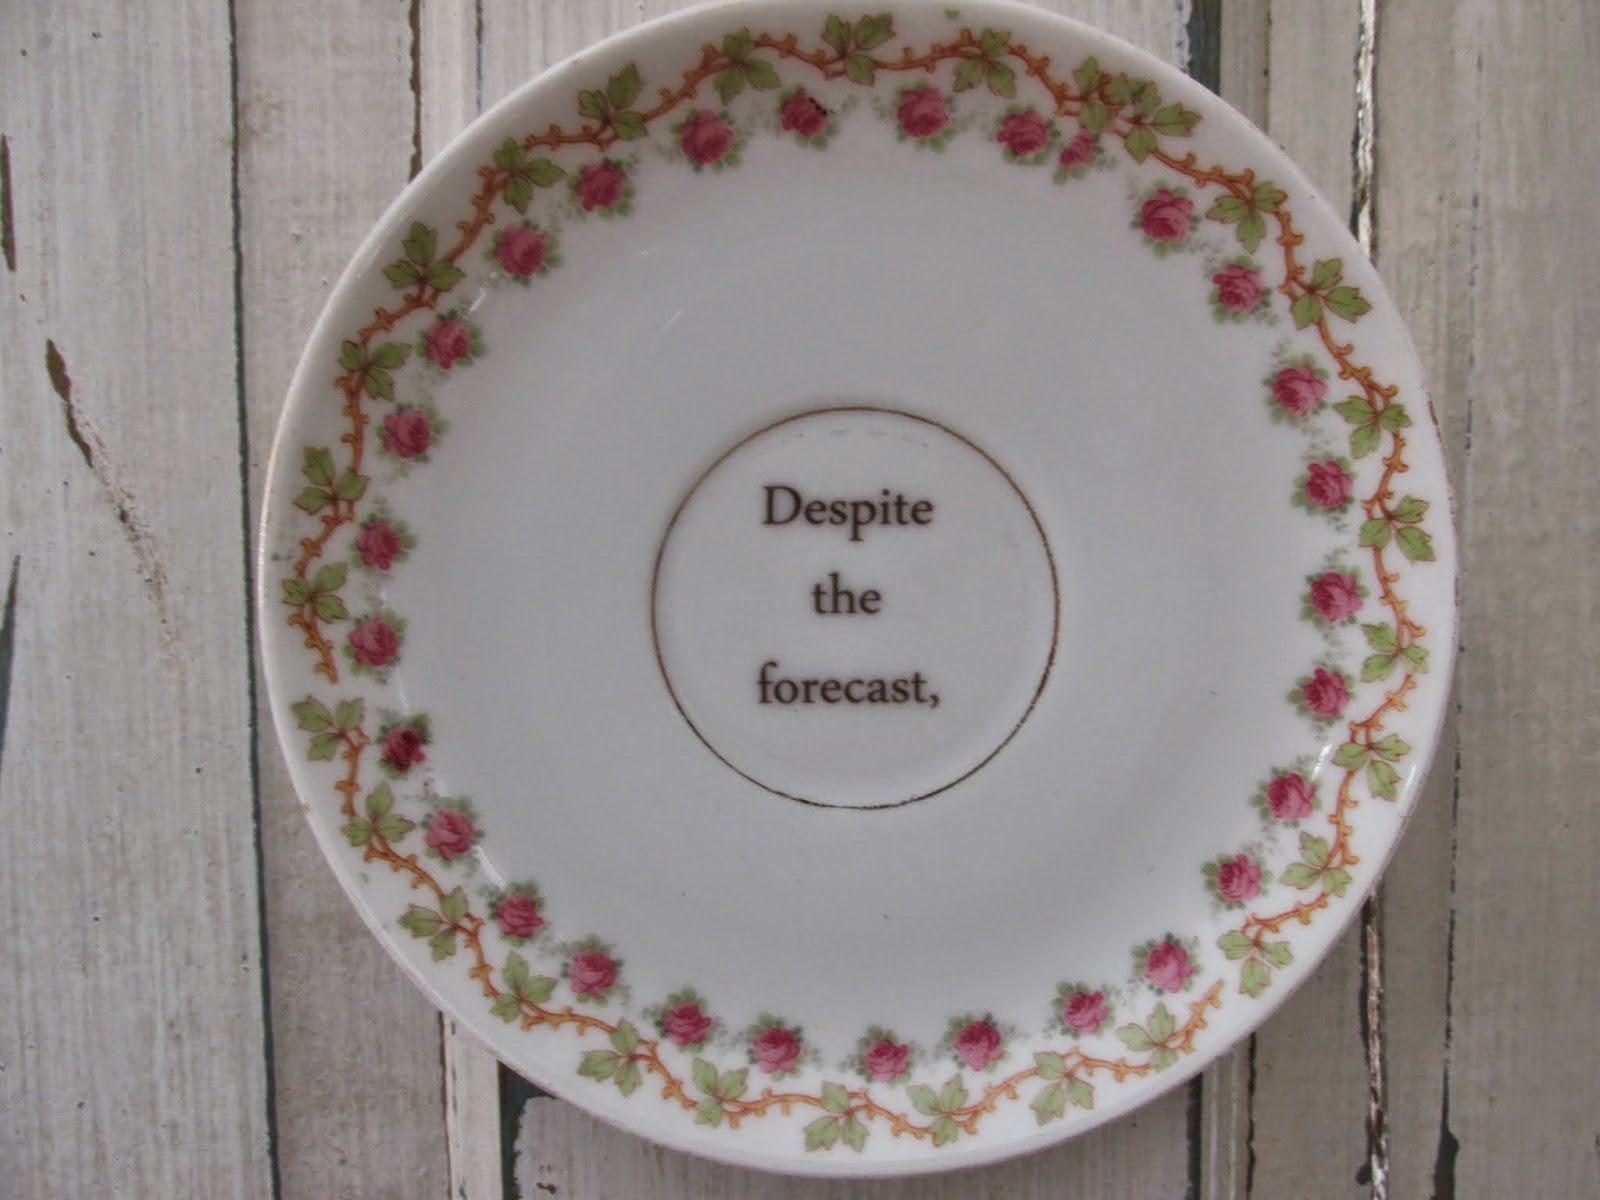 The Darling Touch: Vintage Plates Say 